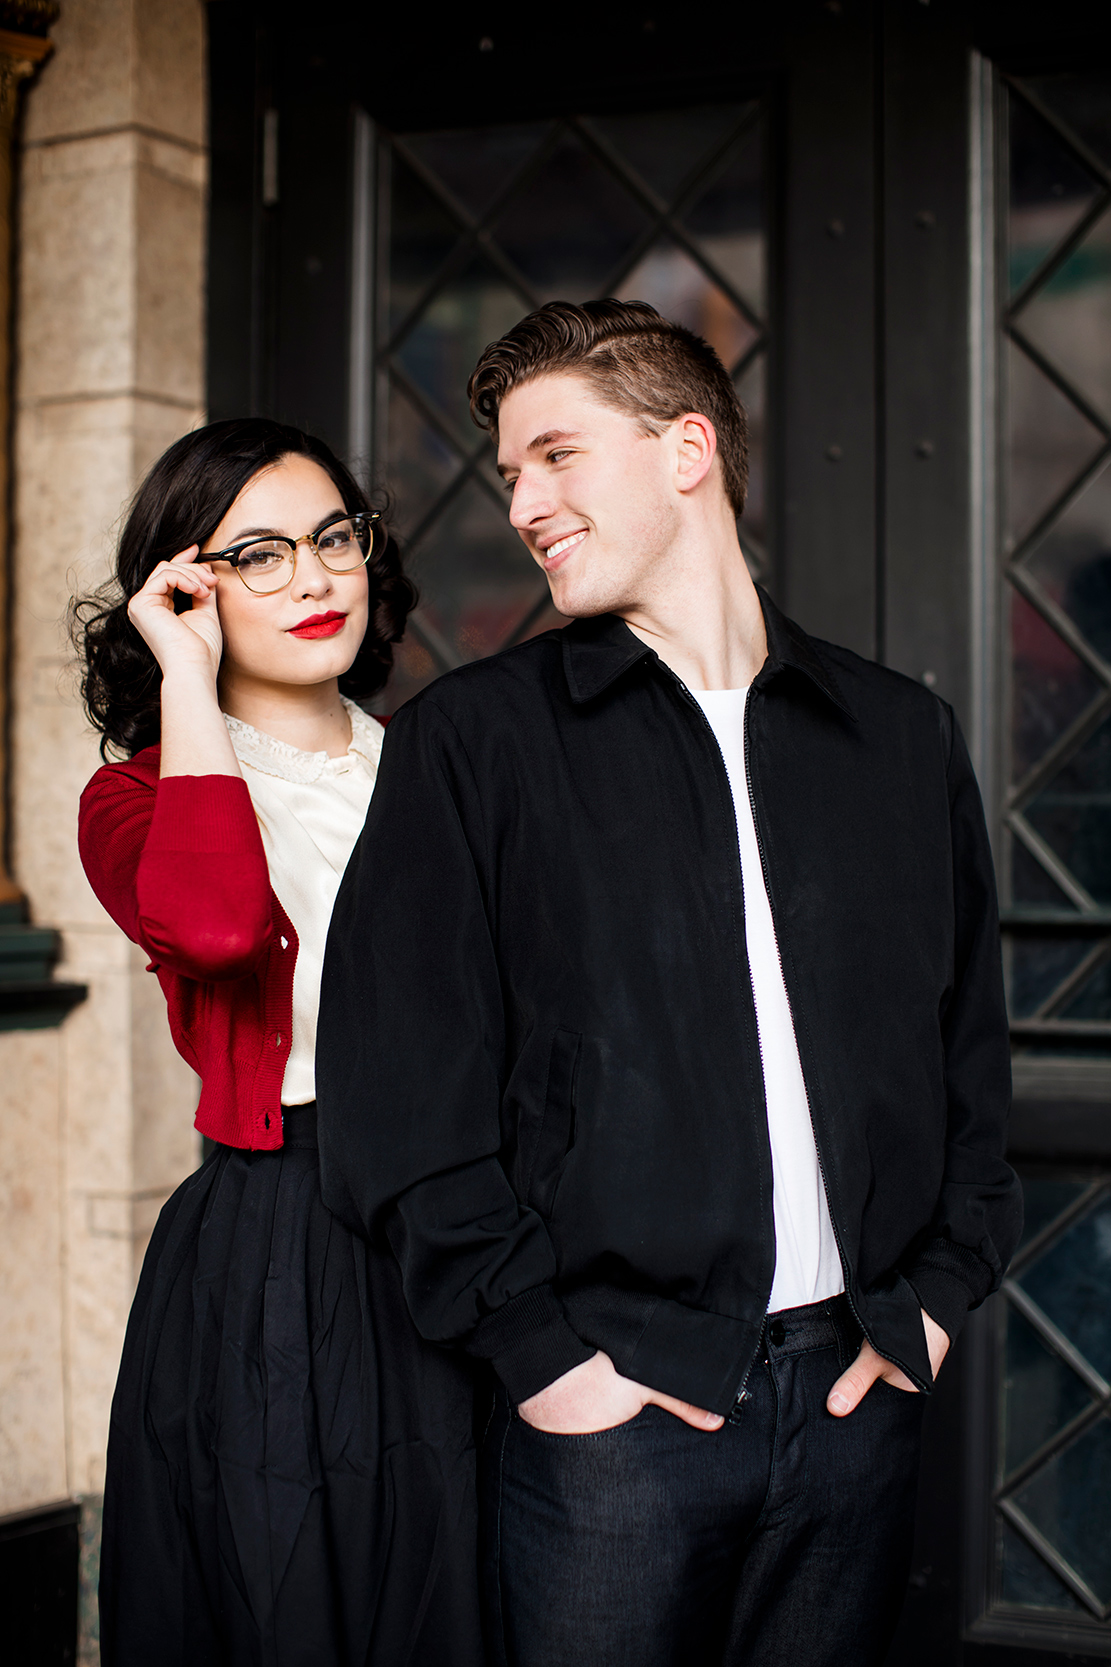 1950s Inspired Styled Couples Shoot - Image Property of www.j-dphoto.com